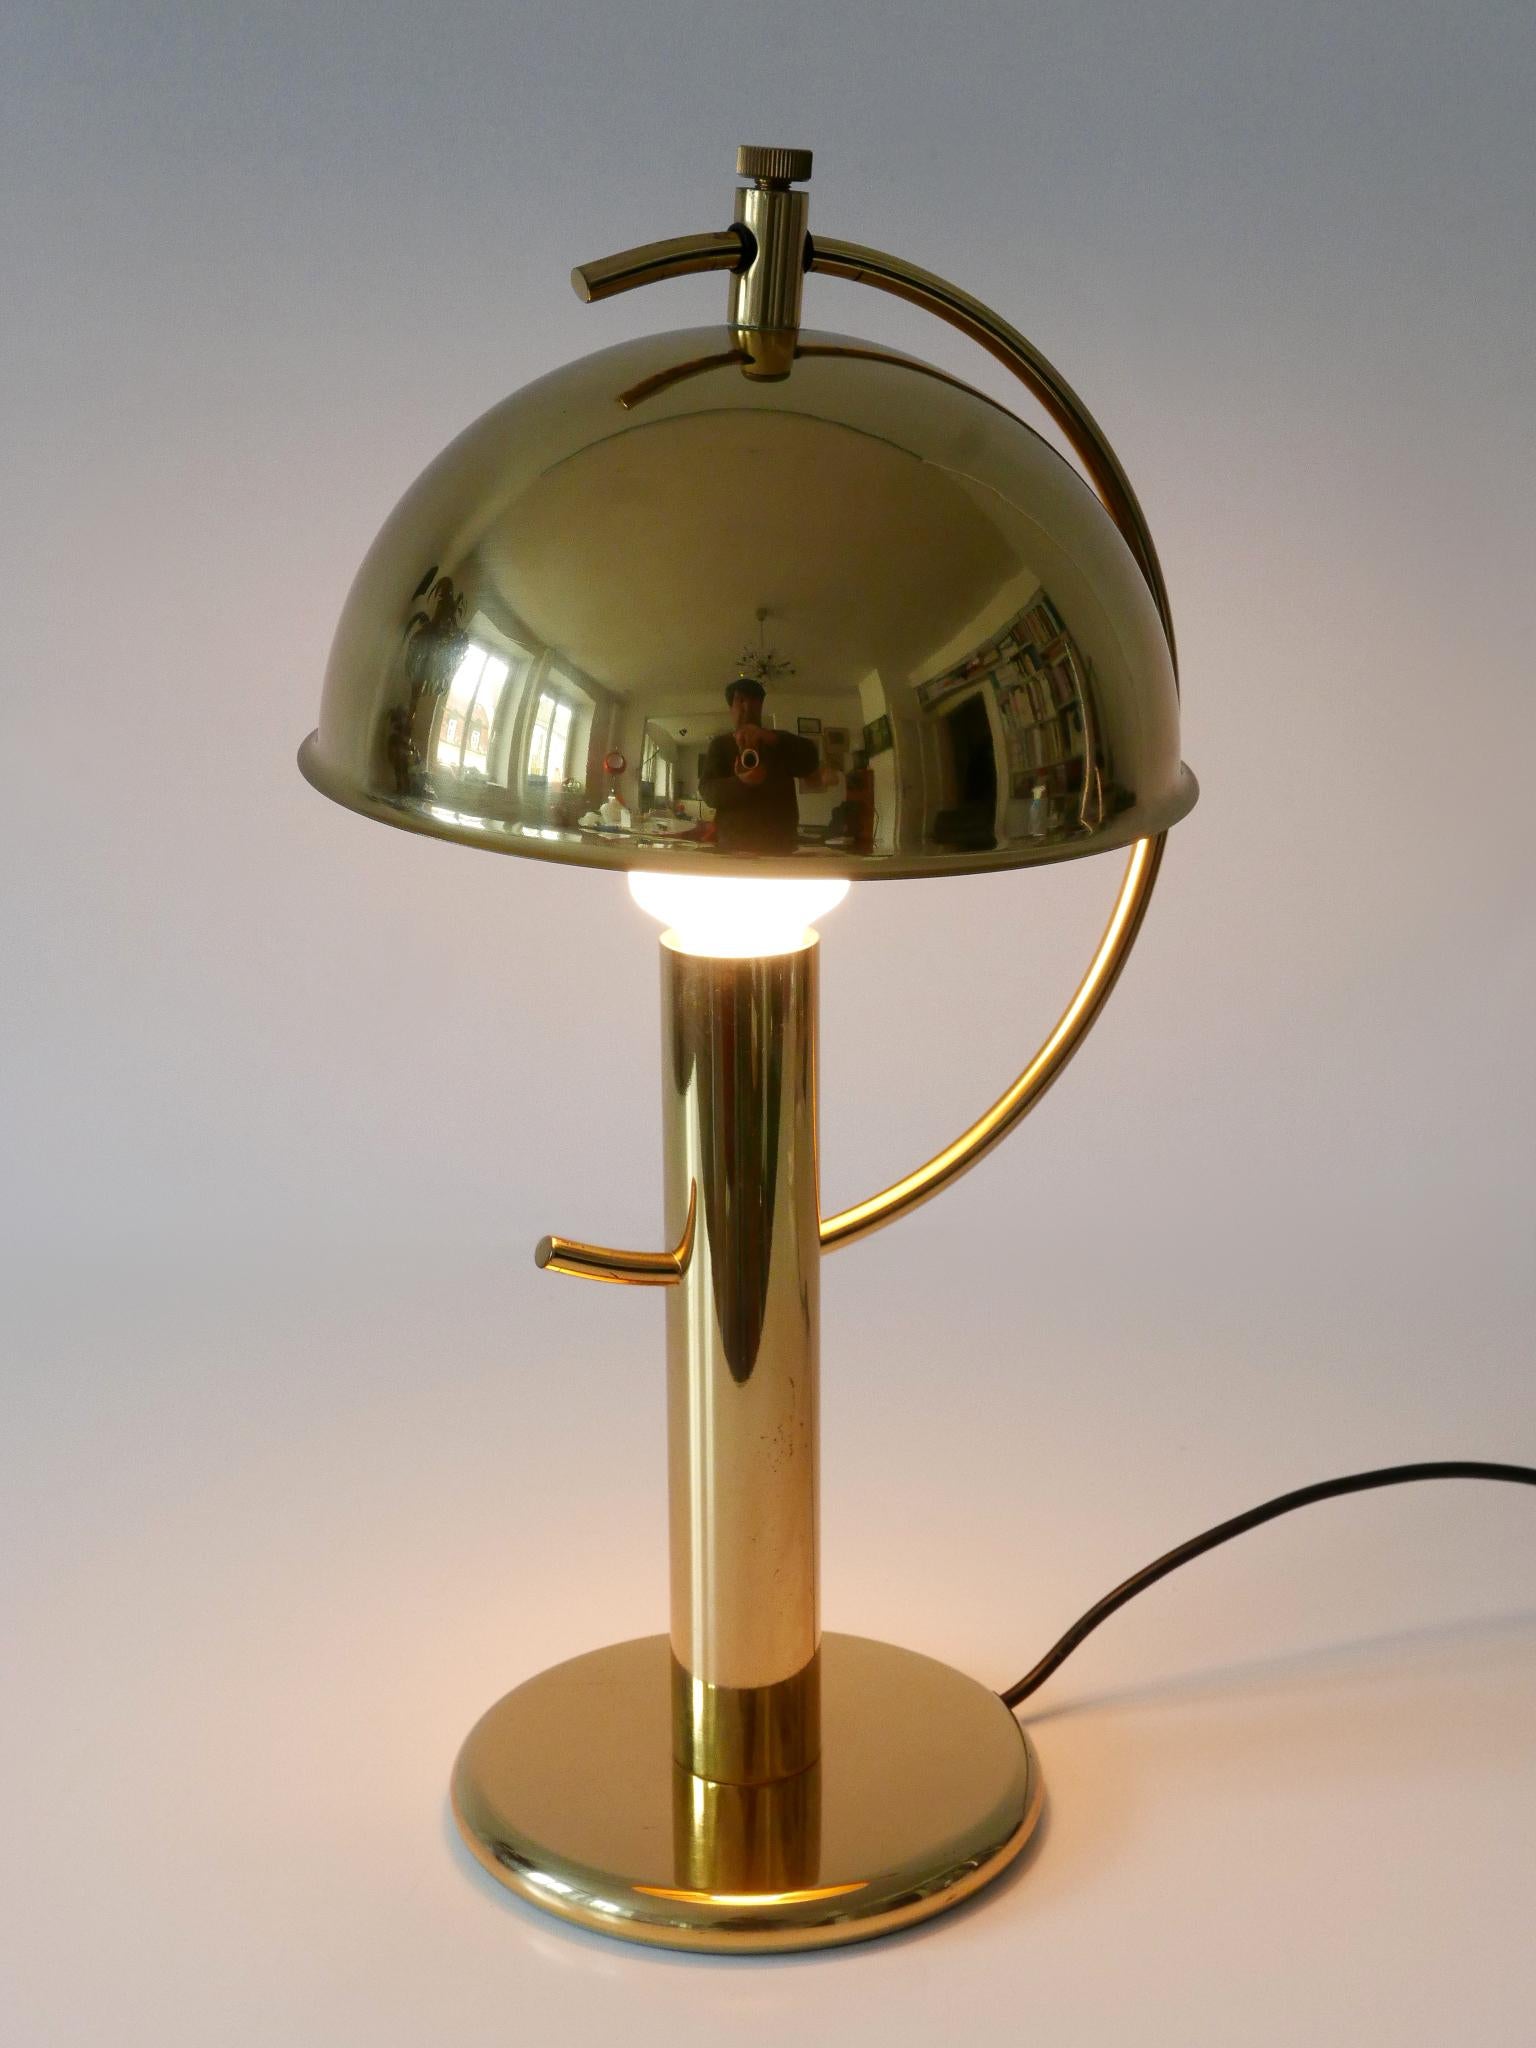 Exceptional Mid-Century Modern Brass Table Lamp by Gebrüder Cosack Germany 1960s For Sale 13